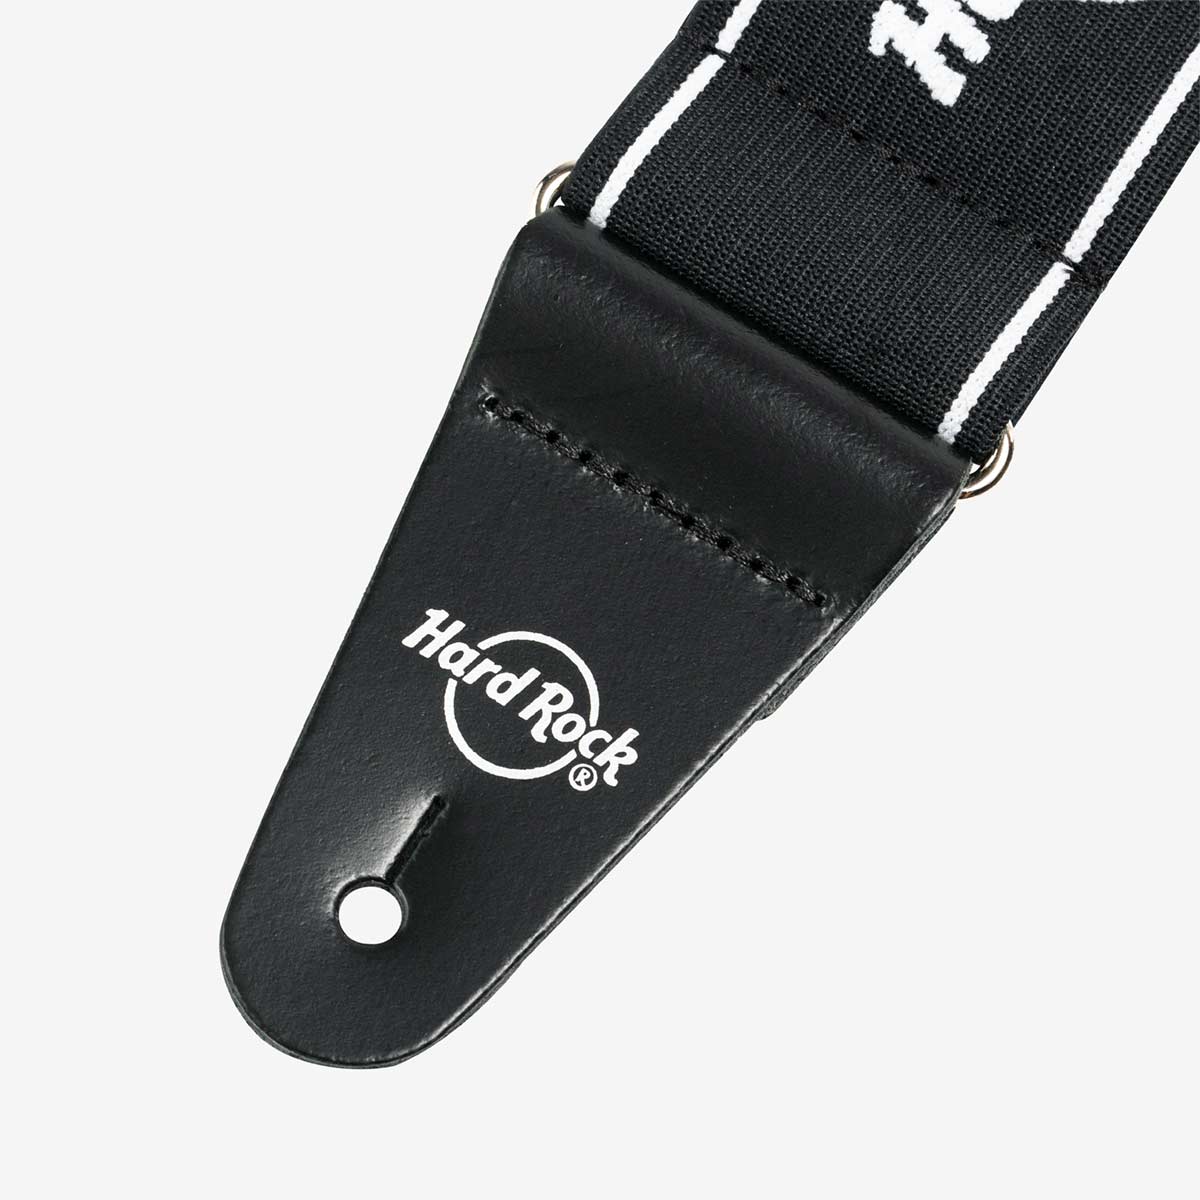 Fender x Hard Rock Weightless Guitar Strap in Black and White